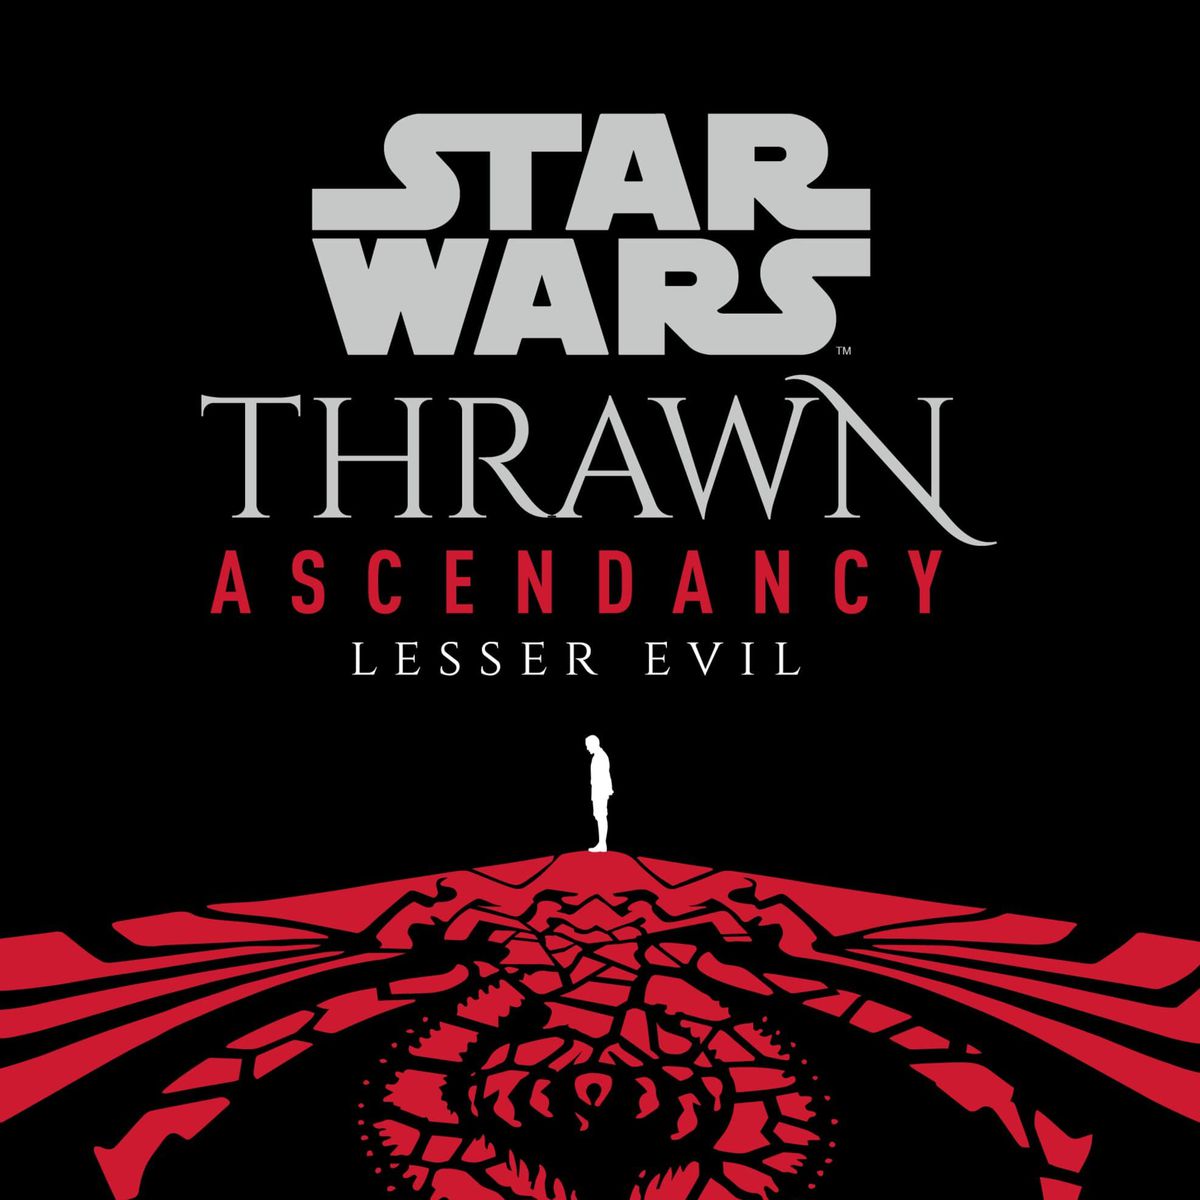 Thrawn stands on a red pattern of Chiss design on the cover for Star Wars: Thrawn Ascendency Lesser Evil